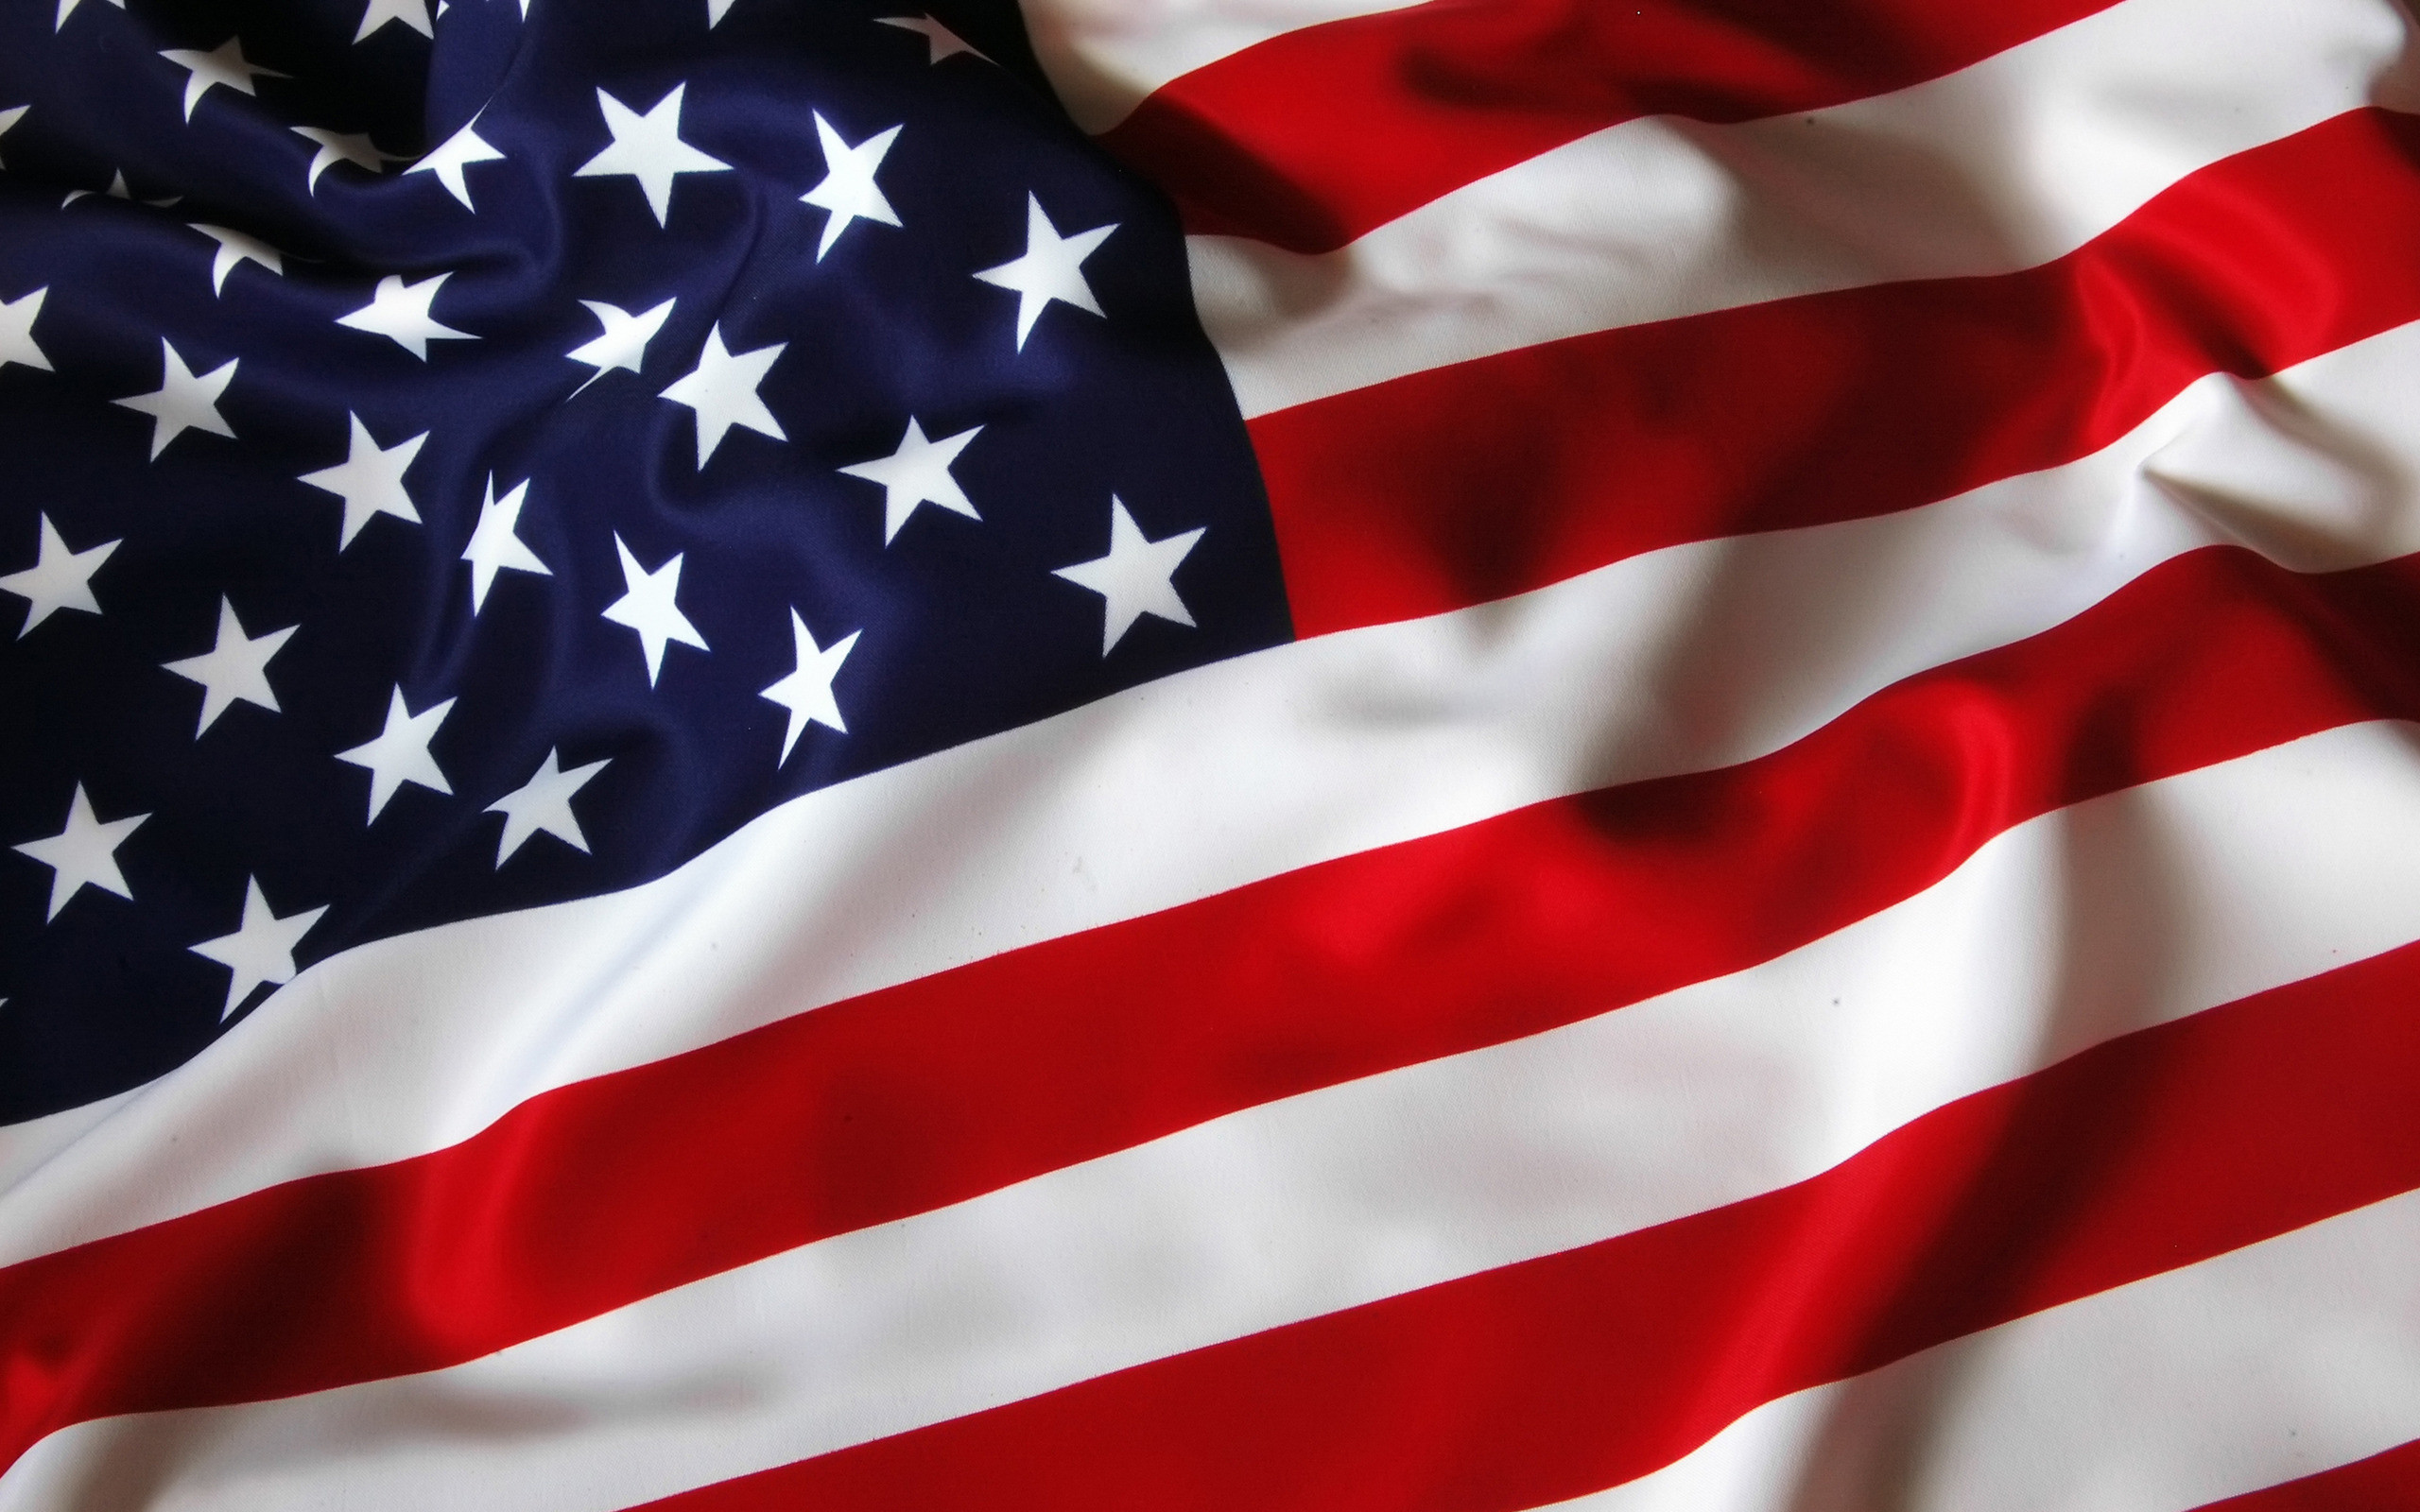 HD wallpaper US flag american flag united states flags national  patriotic  Wallpaper Flare